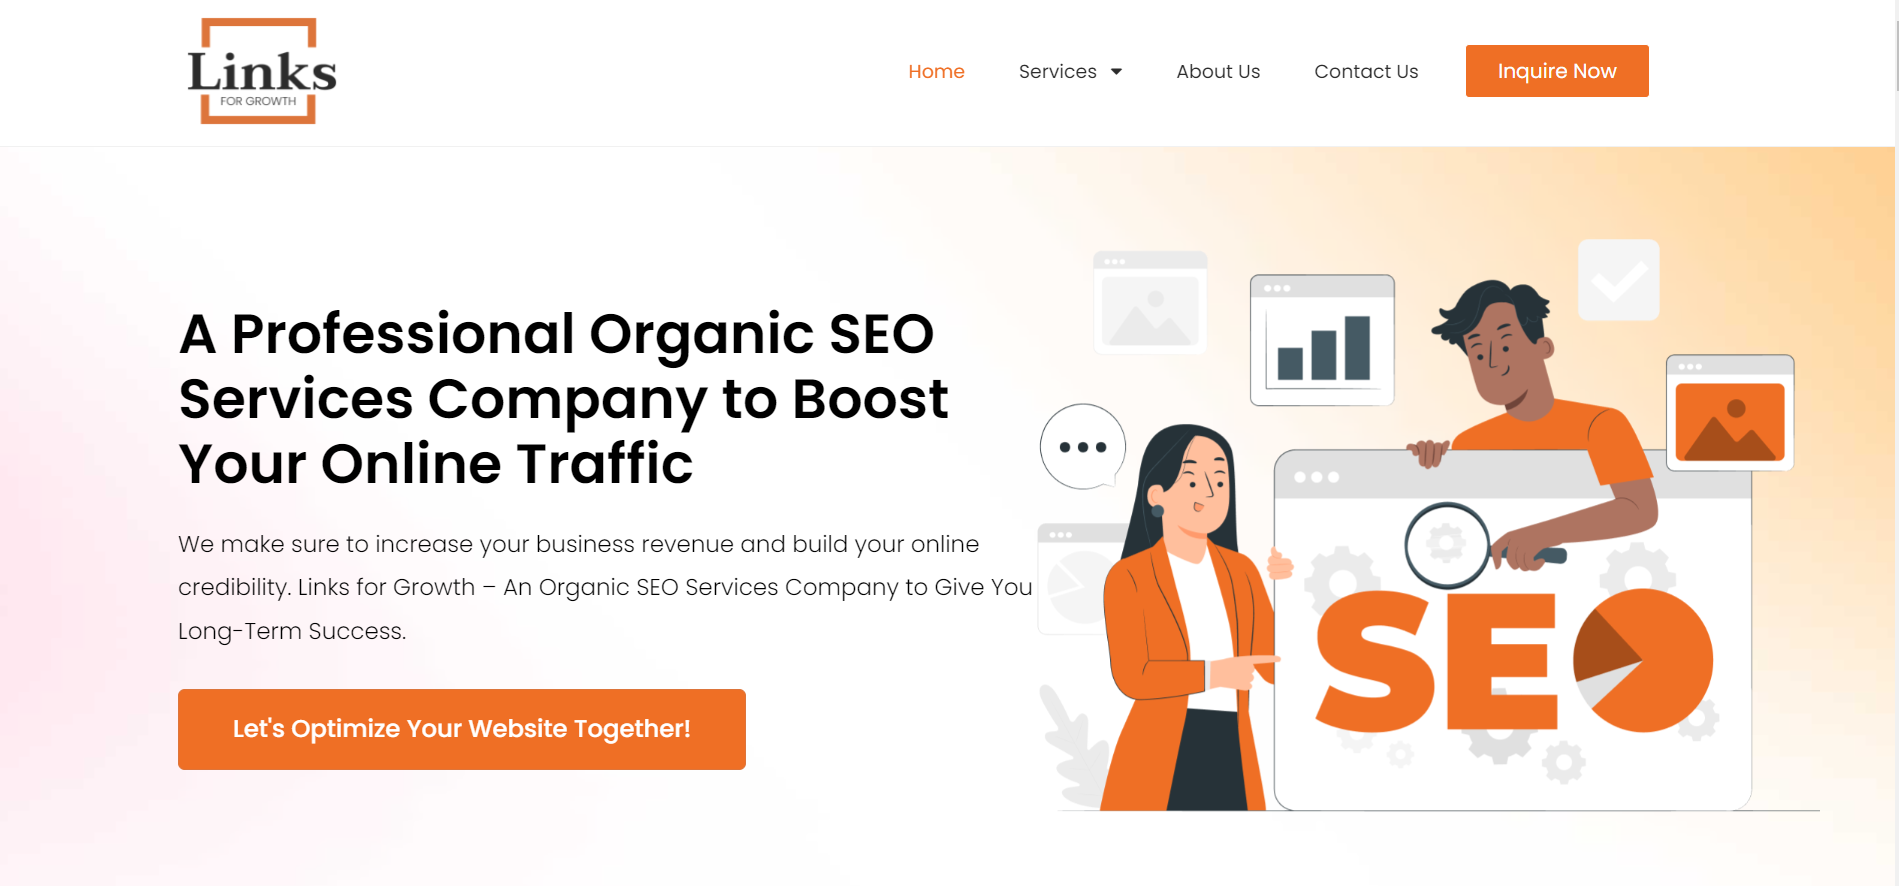 Links for growth - SEO link building agency